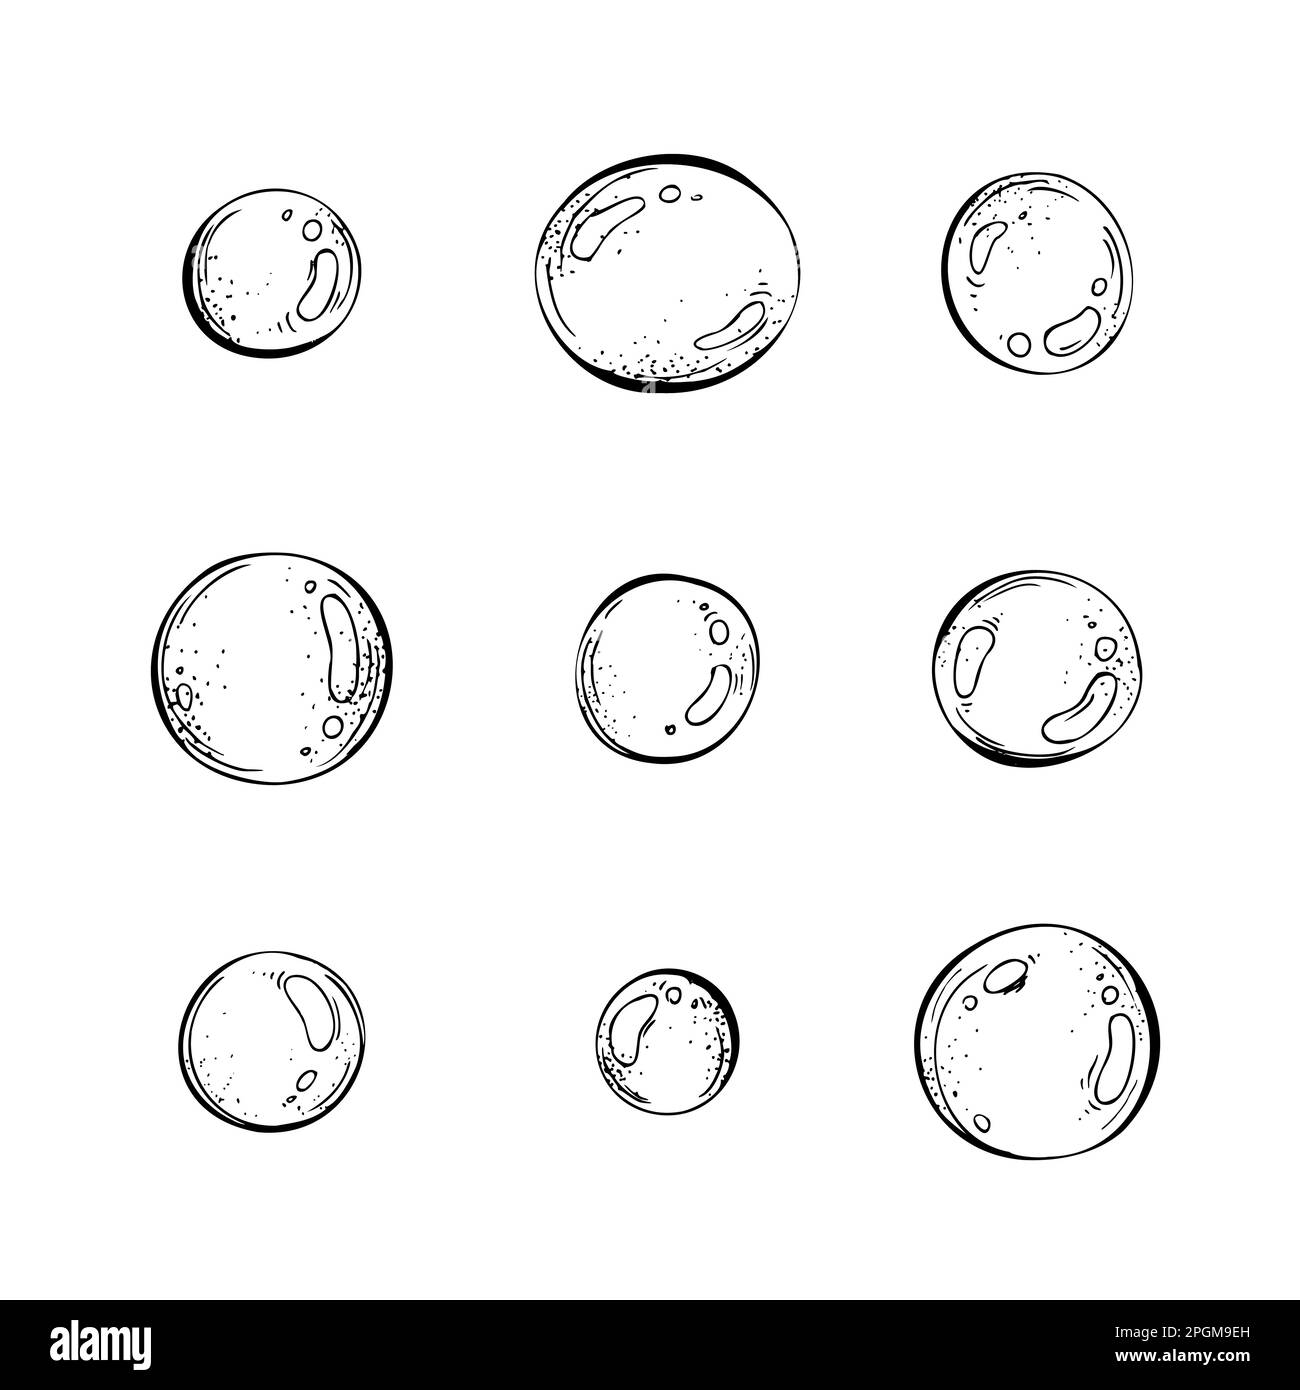 Bubbles of water, different. Black and white hand-drawn illustration in graphic technique. Isolated, vector objects from the NAUTICAL GRAPHICS Stock Vector